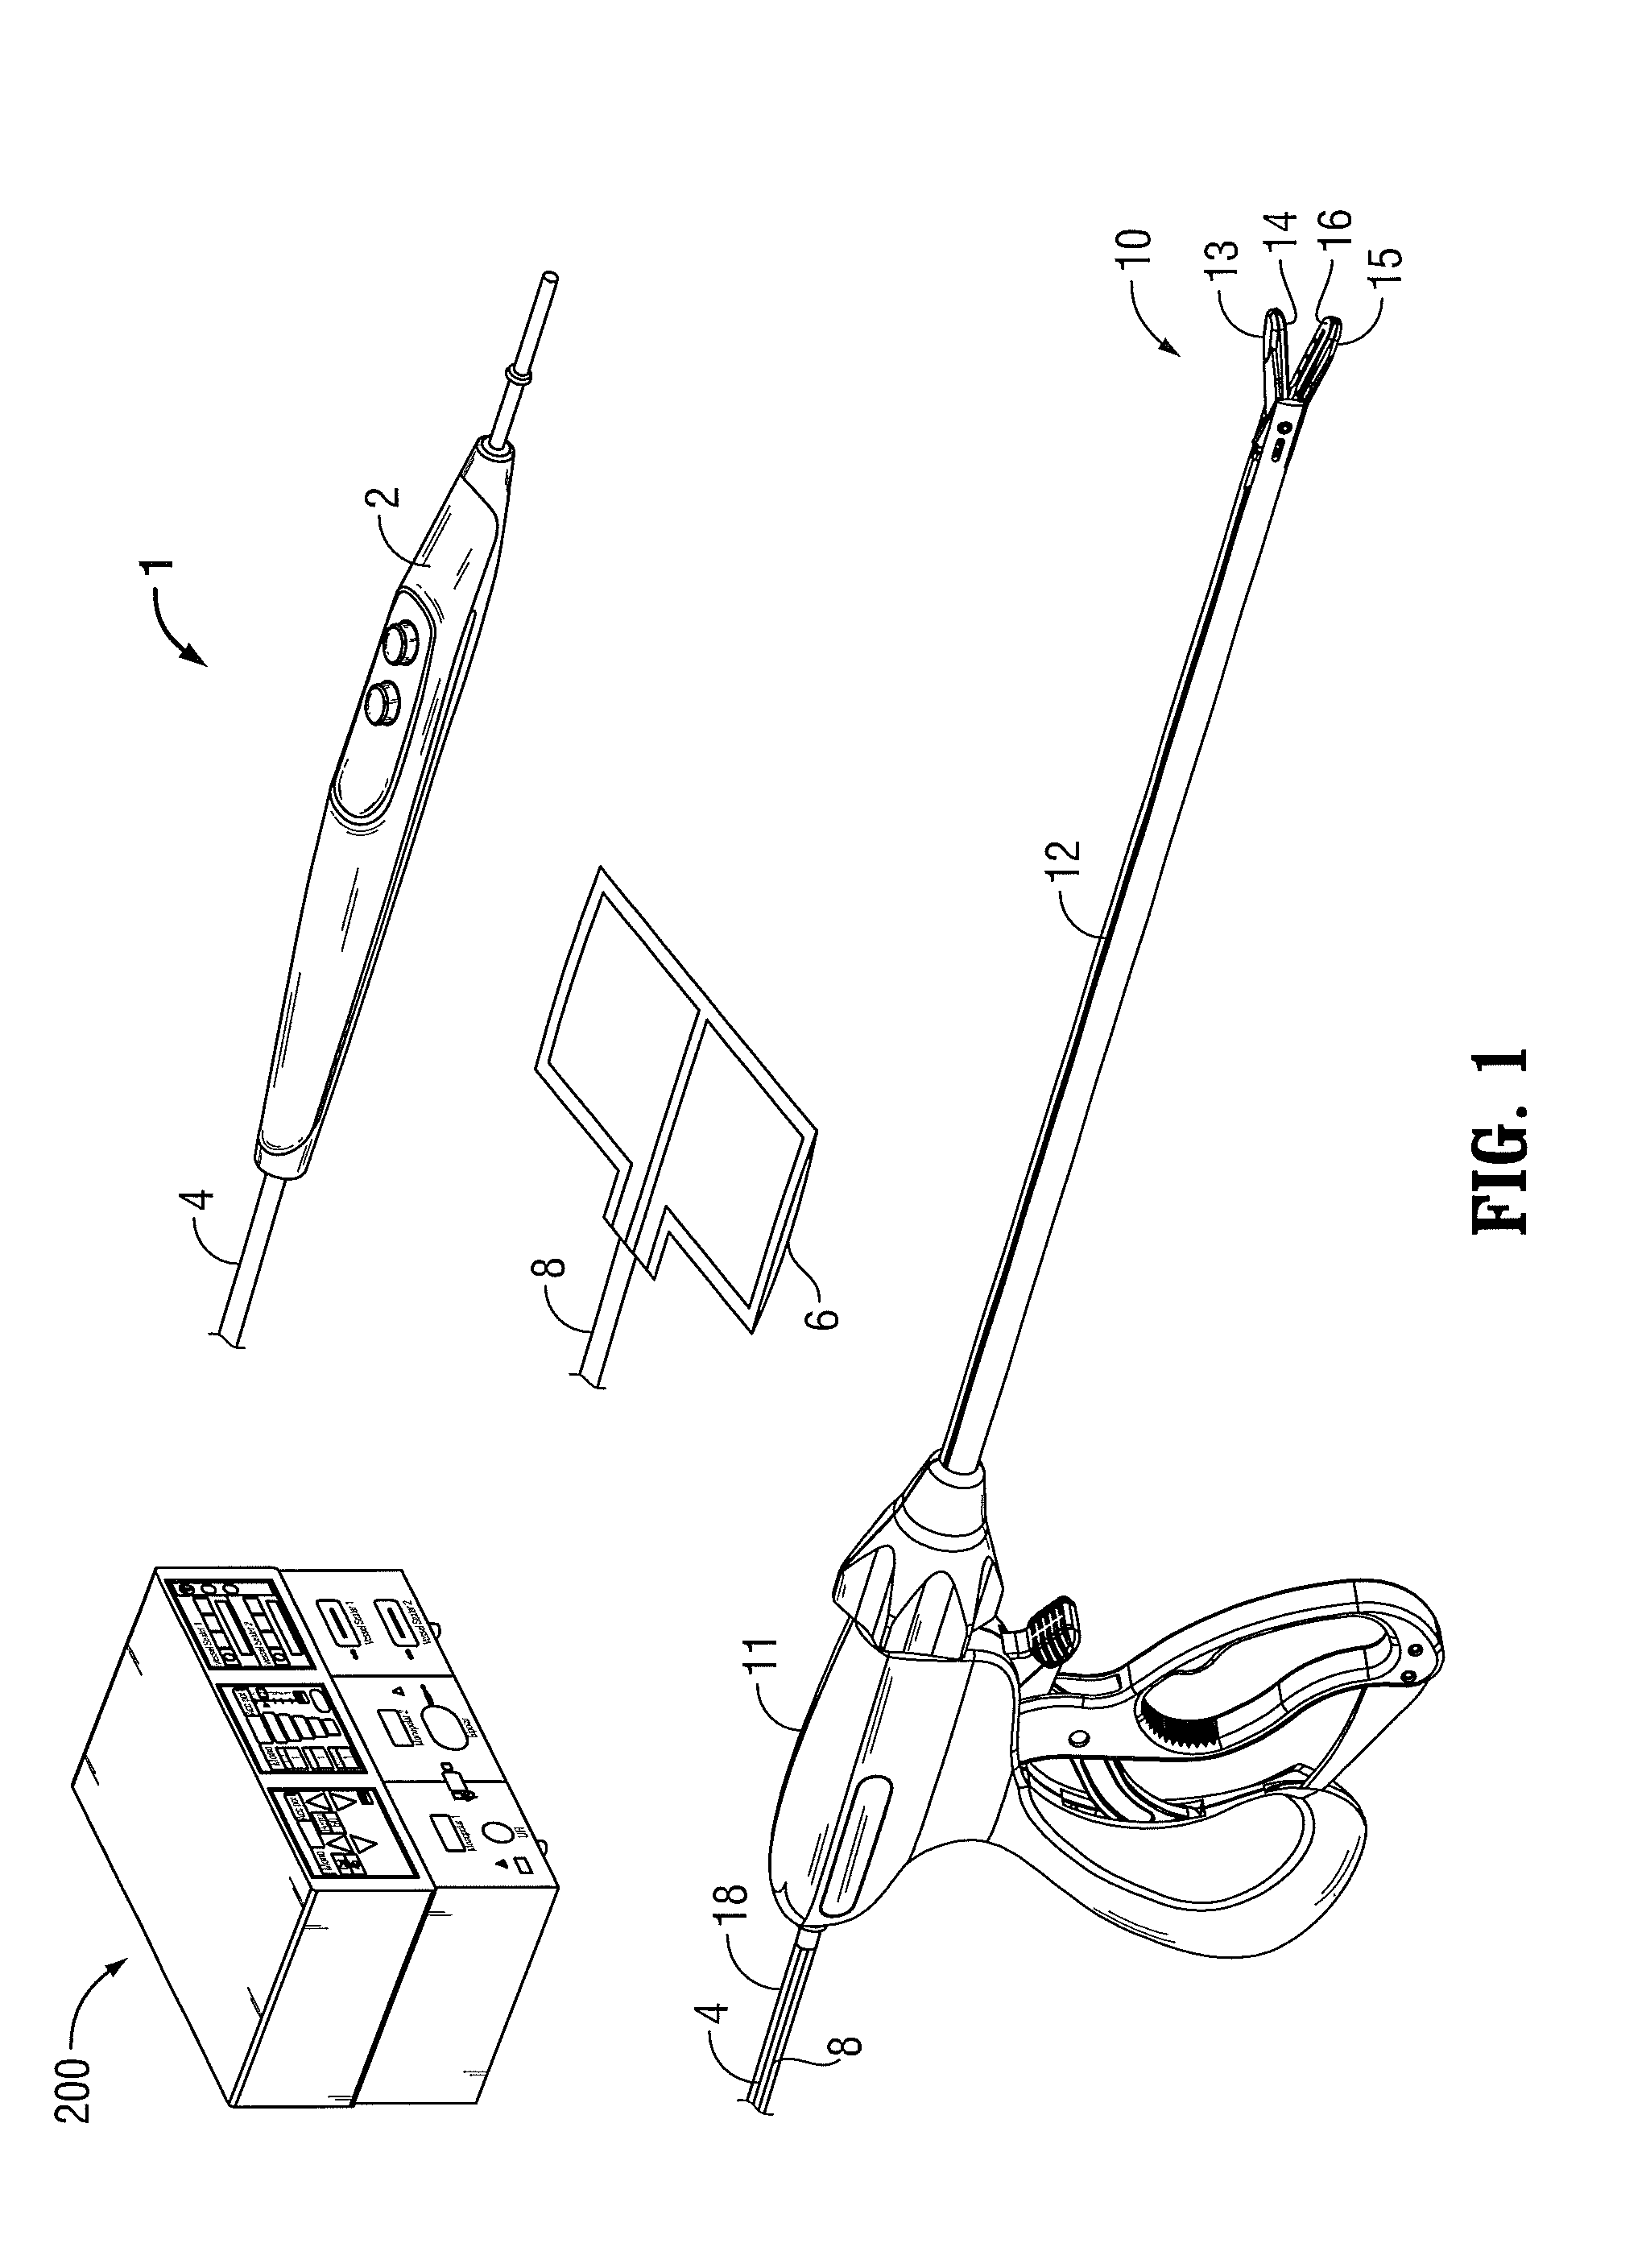 System and method for voltage and current sensing